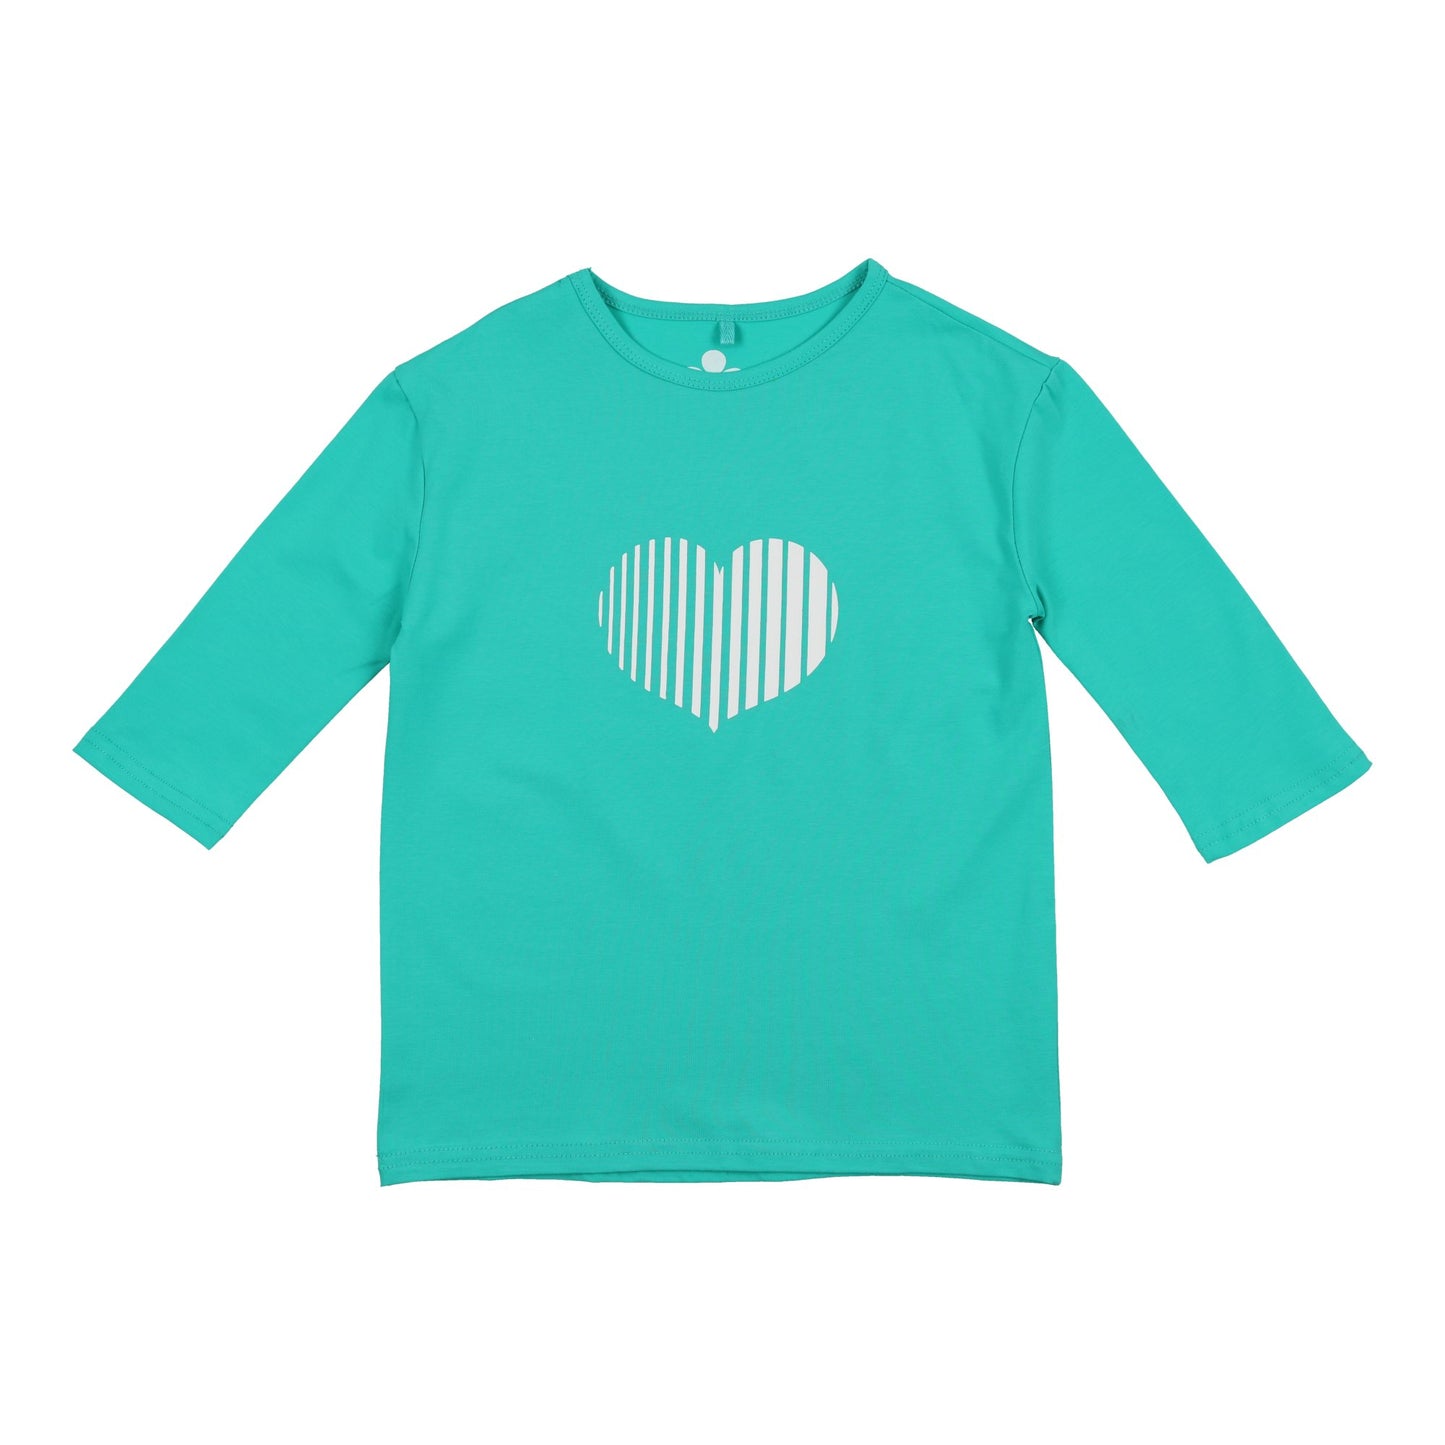 Three Bows Girls Heart Tee (5 colors) - Modest Necessities